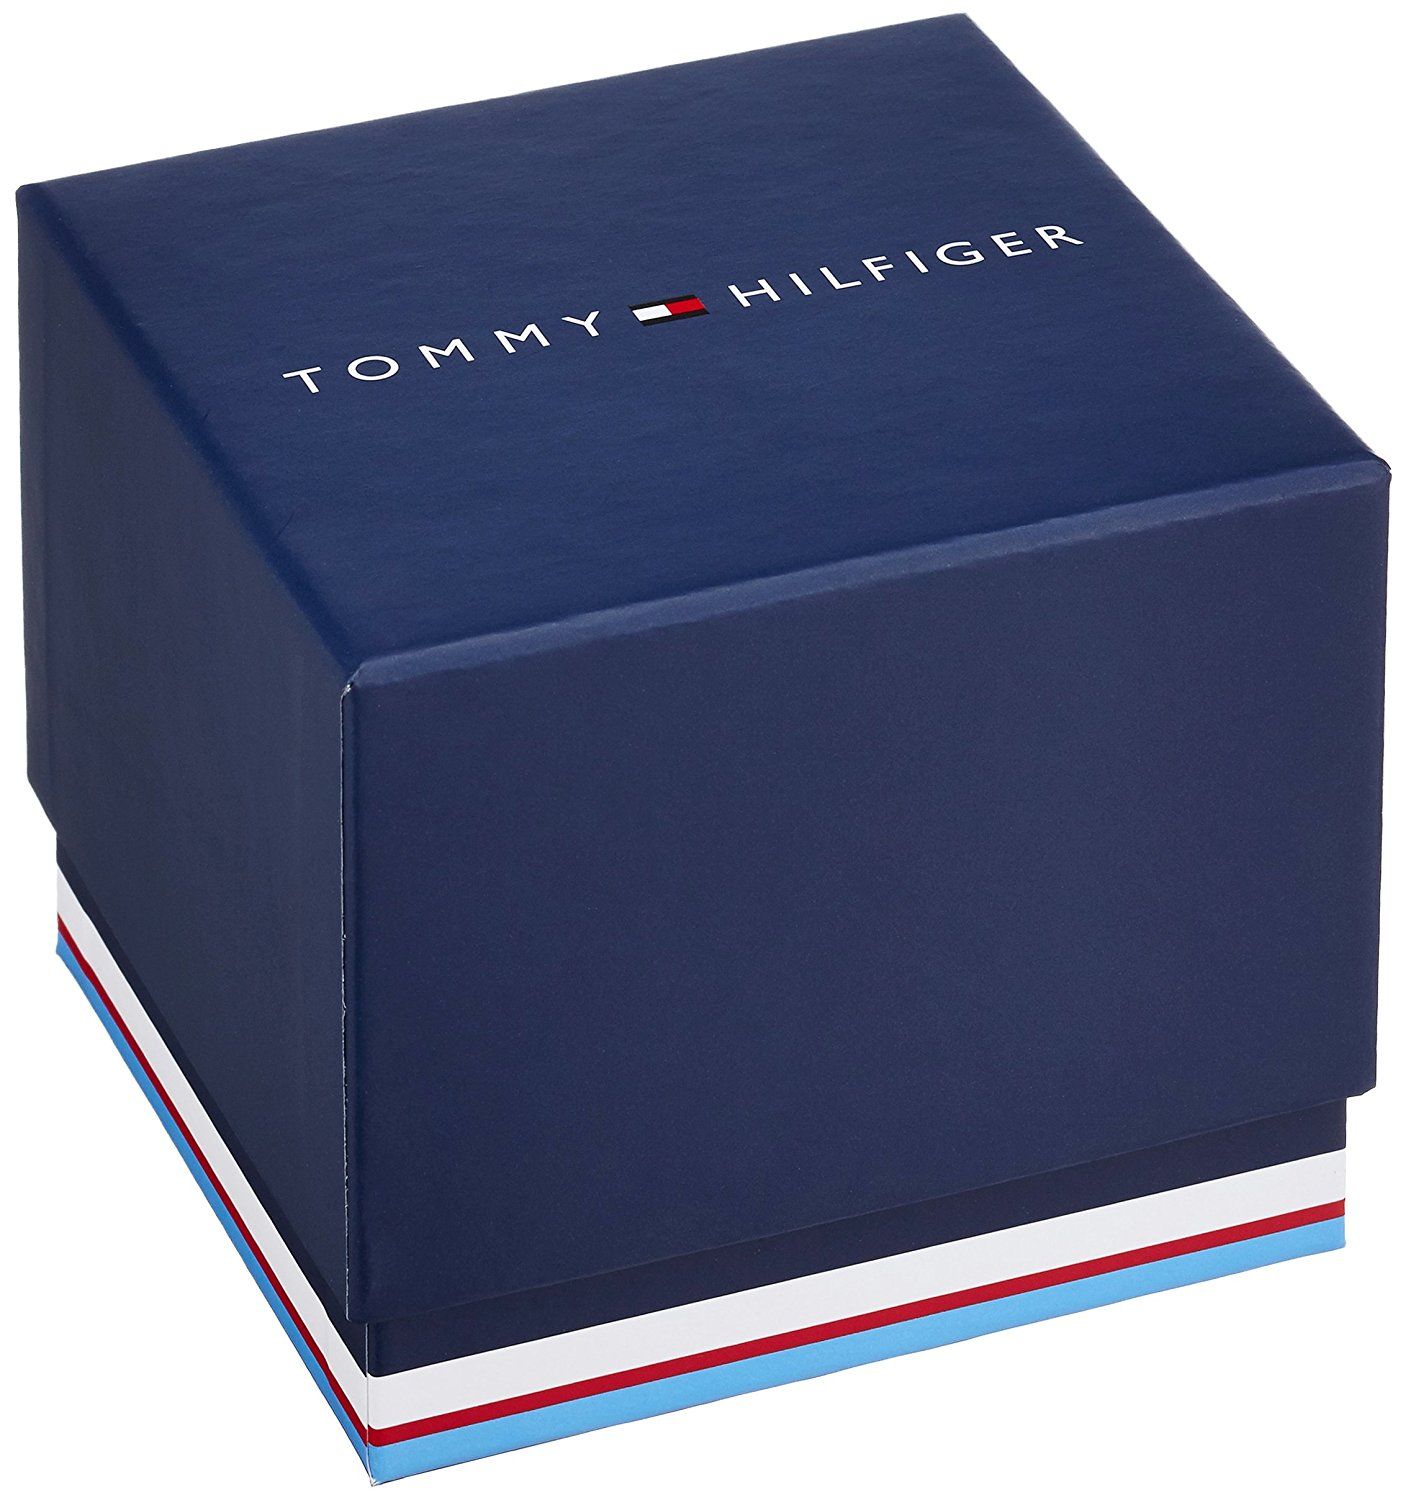 This Tommy Hilfiger Matthew Multi Dial Watch for Men is the perfect timepiece to wear or to gift. It's Silver 44 mm Round case combined with the comfortable Brown Leather watch band will ensure you enjoy this stunning timepiece without any compromise. Operated by a high quality Quartz movement and water resistant to 5 bars, your watch will keep ticking. This classic watch gives a comfortable feeling with its leather strap, it's perfect for every occasion -The watch has a calendar function: Day-Date, 24-hour Display High quality 21 cm length and 21 mm width Brown Leather strap with a Buckle Case diameter: 44 mm,case thickness: 11 mm, case colour: Silver and dial colour: Blue